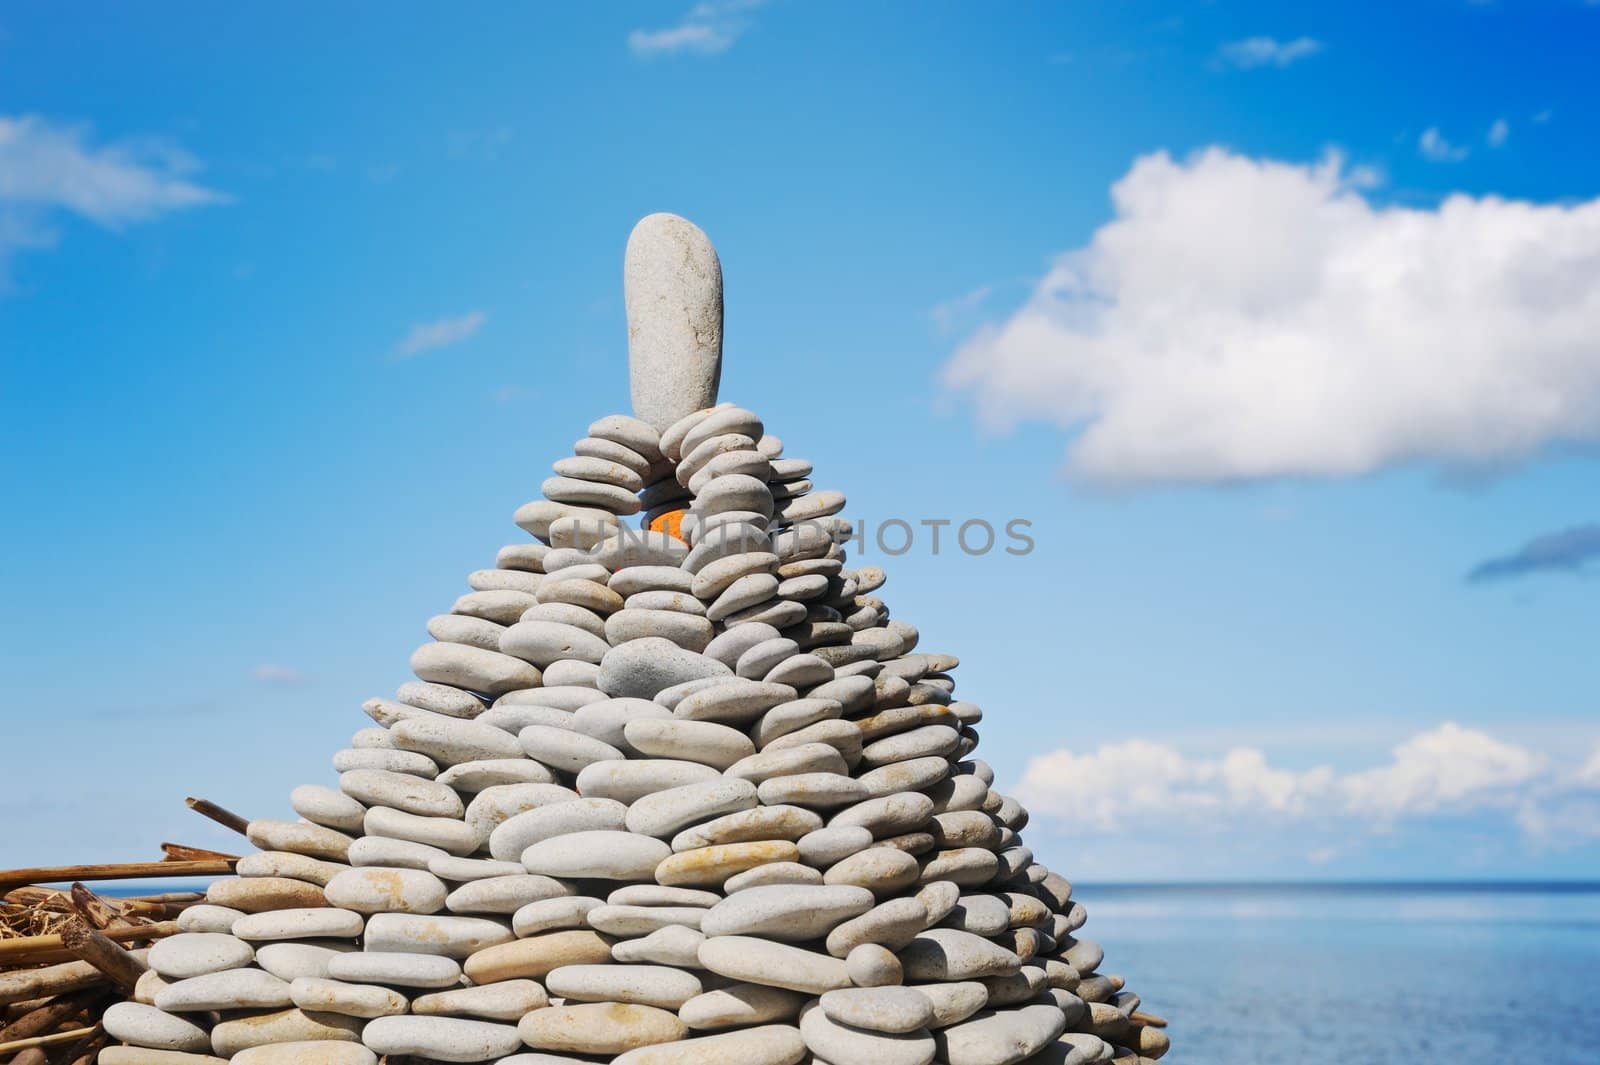 Pyramid from a sea pebble with a stone at top